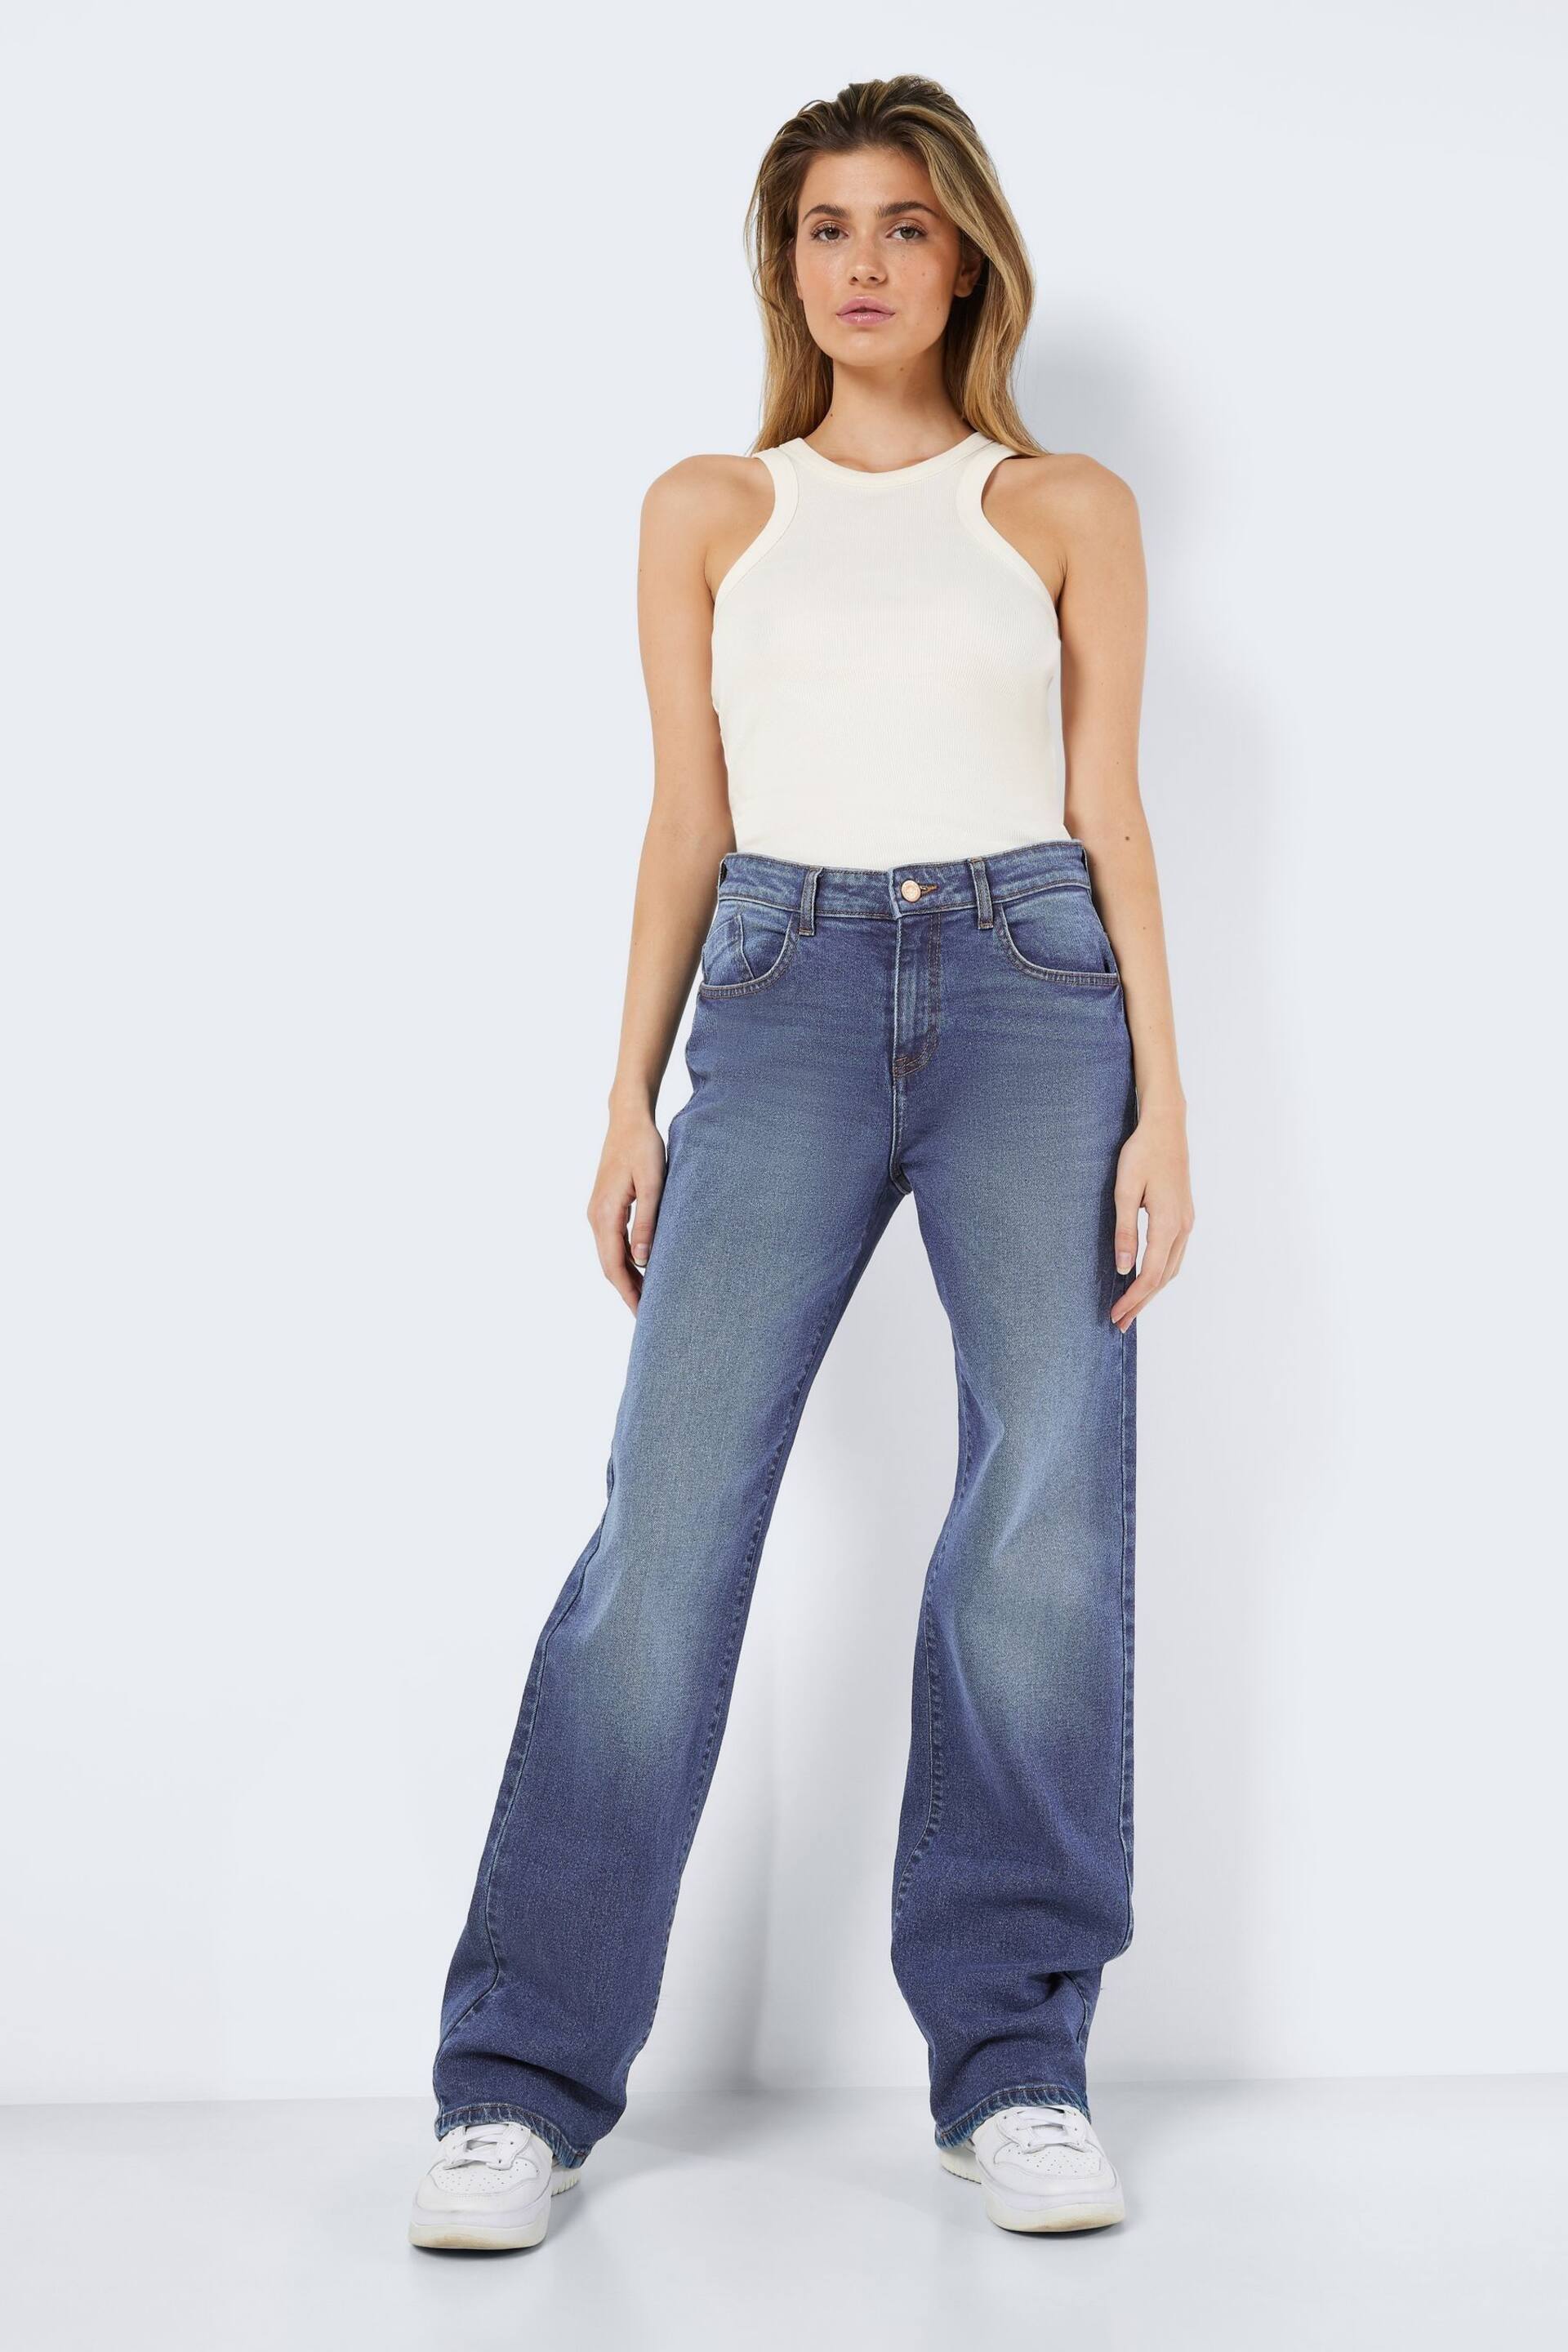 NOISY MAY Blue High Waisted Wide Leg Jeans - Image 6 of 8